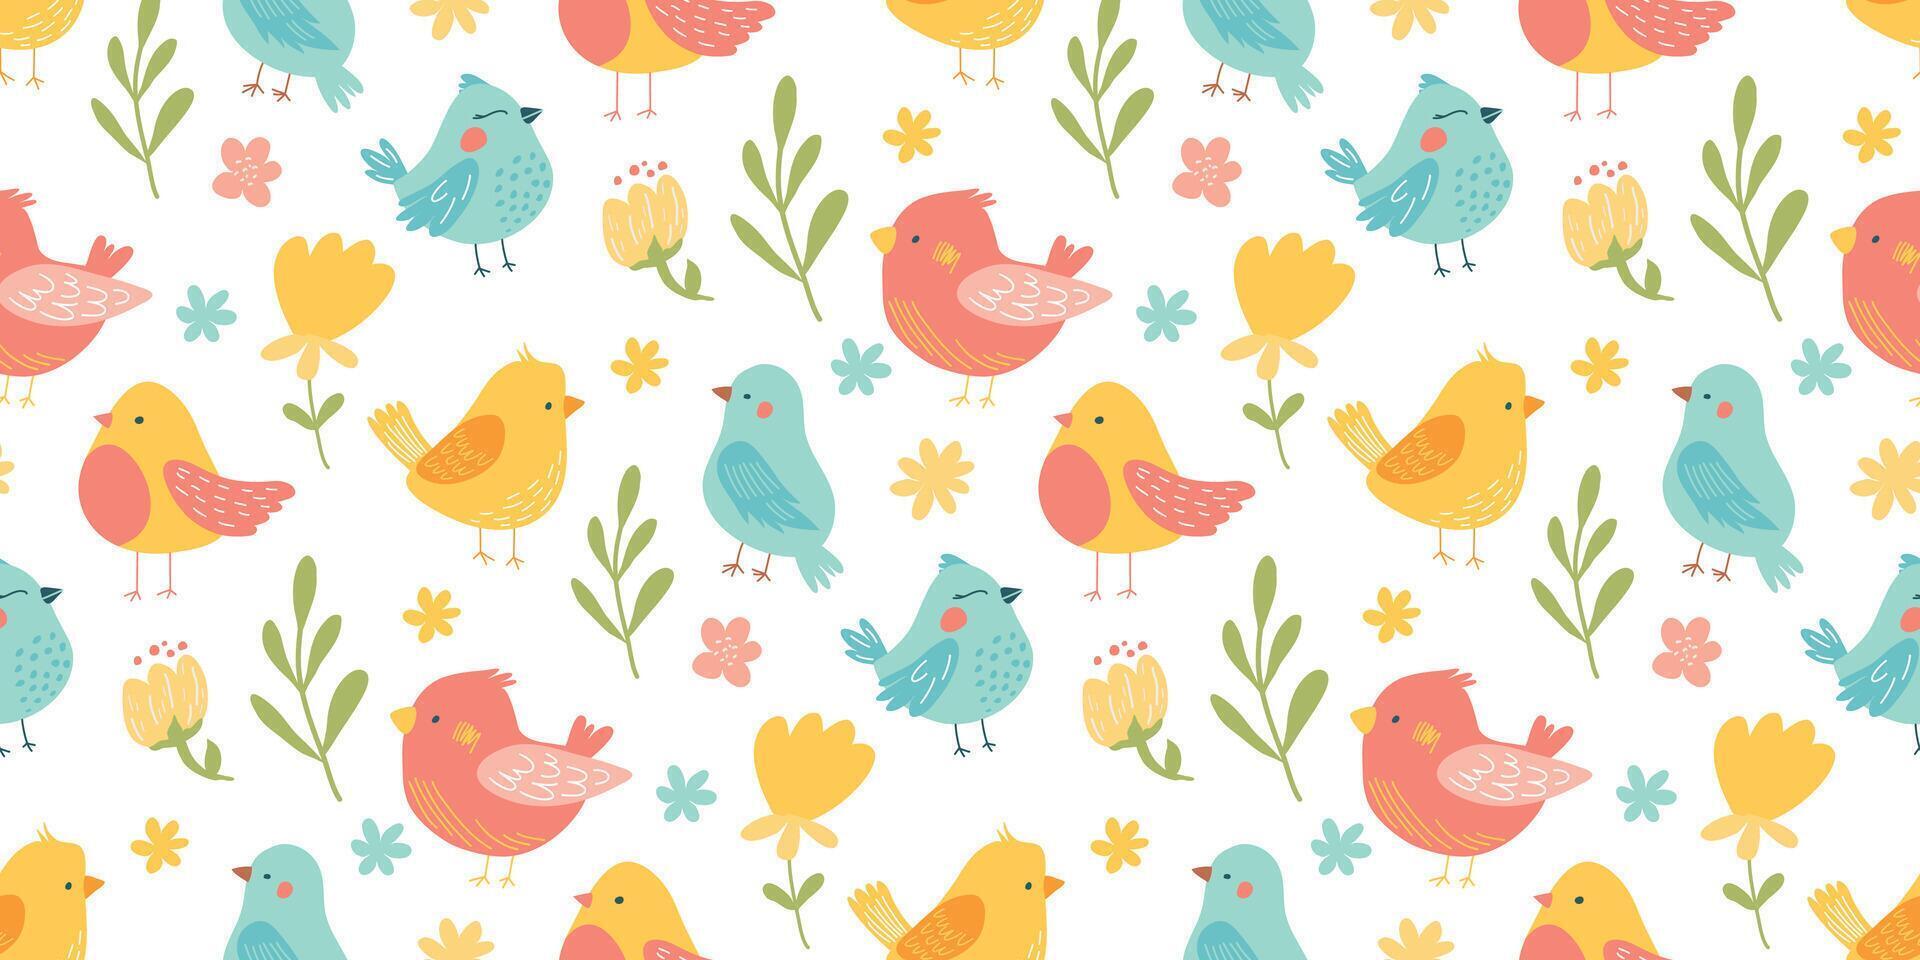 Textile design featuring colorful birds and flowers on a white background vector